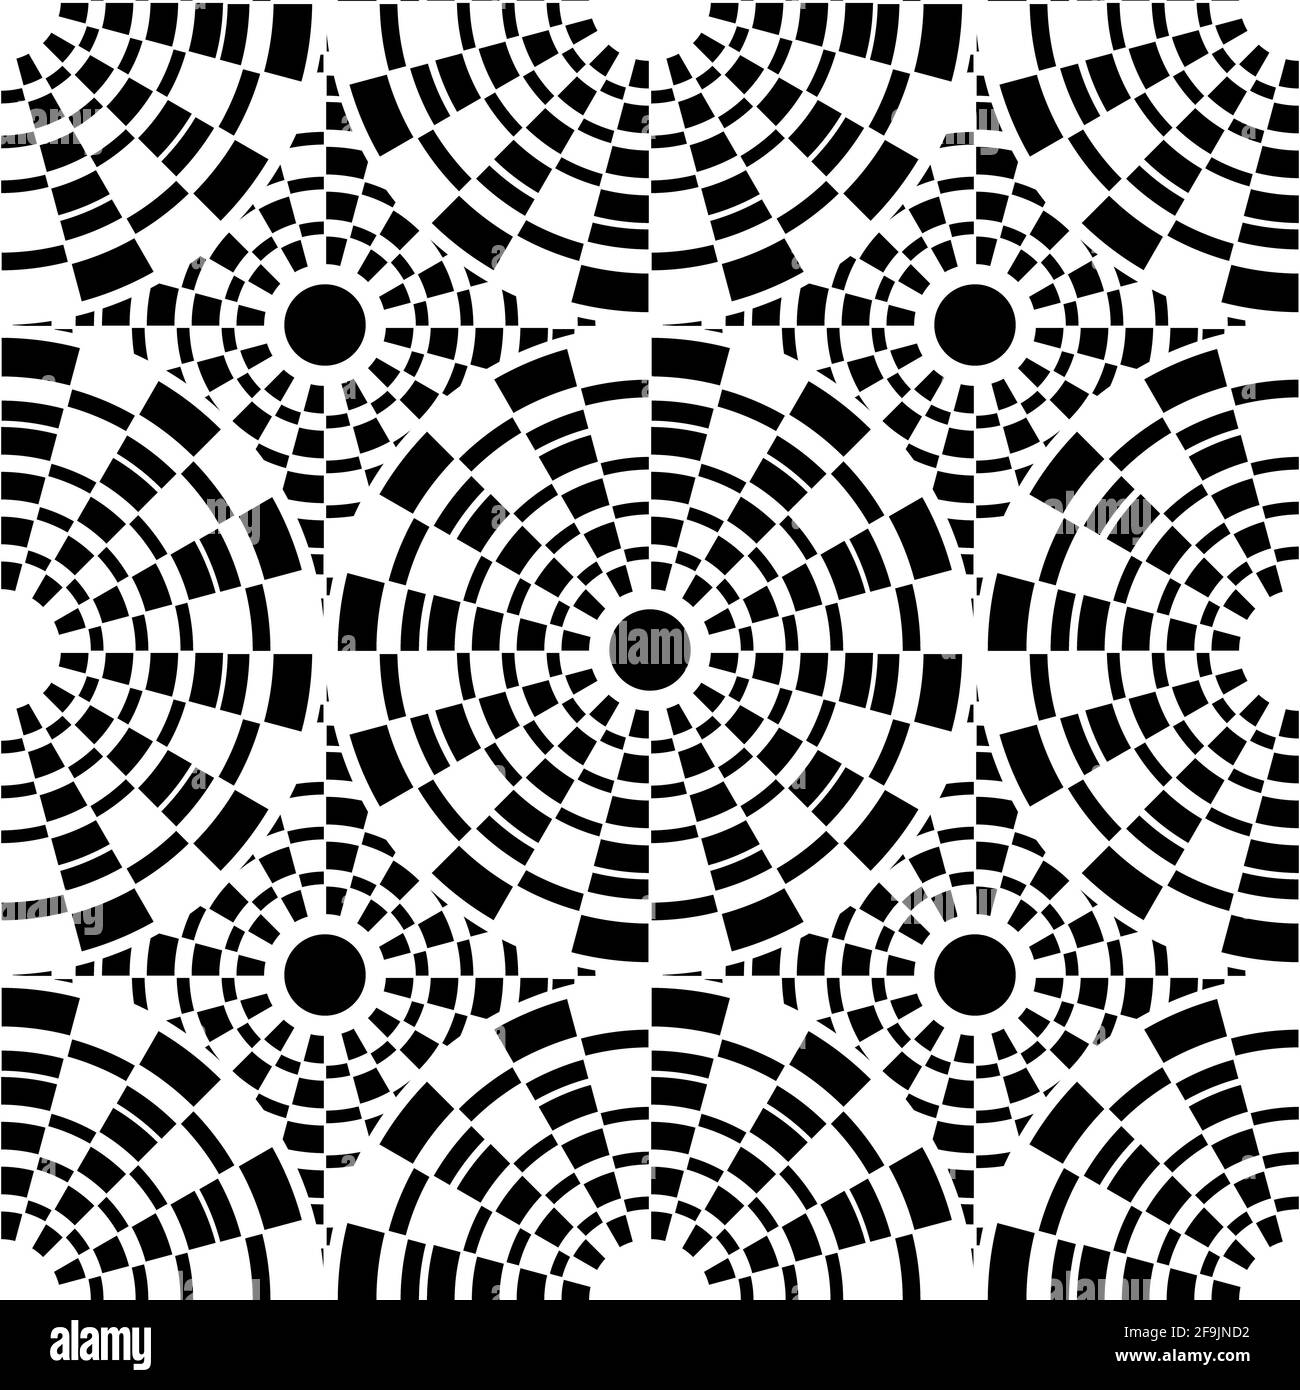 abstract Seamless black and white pattern in the form of abstract circles. Stock Photo